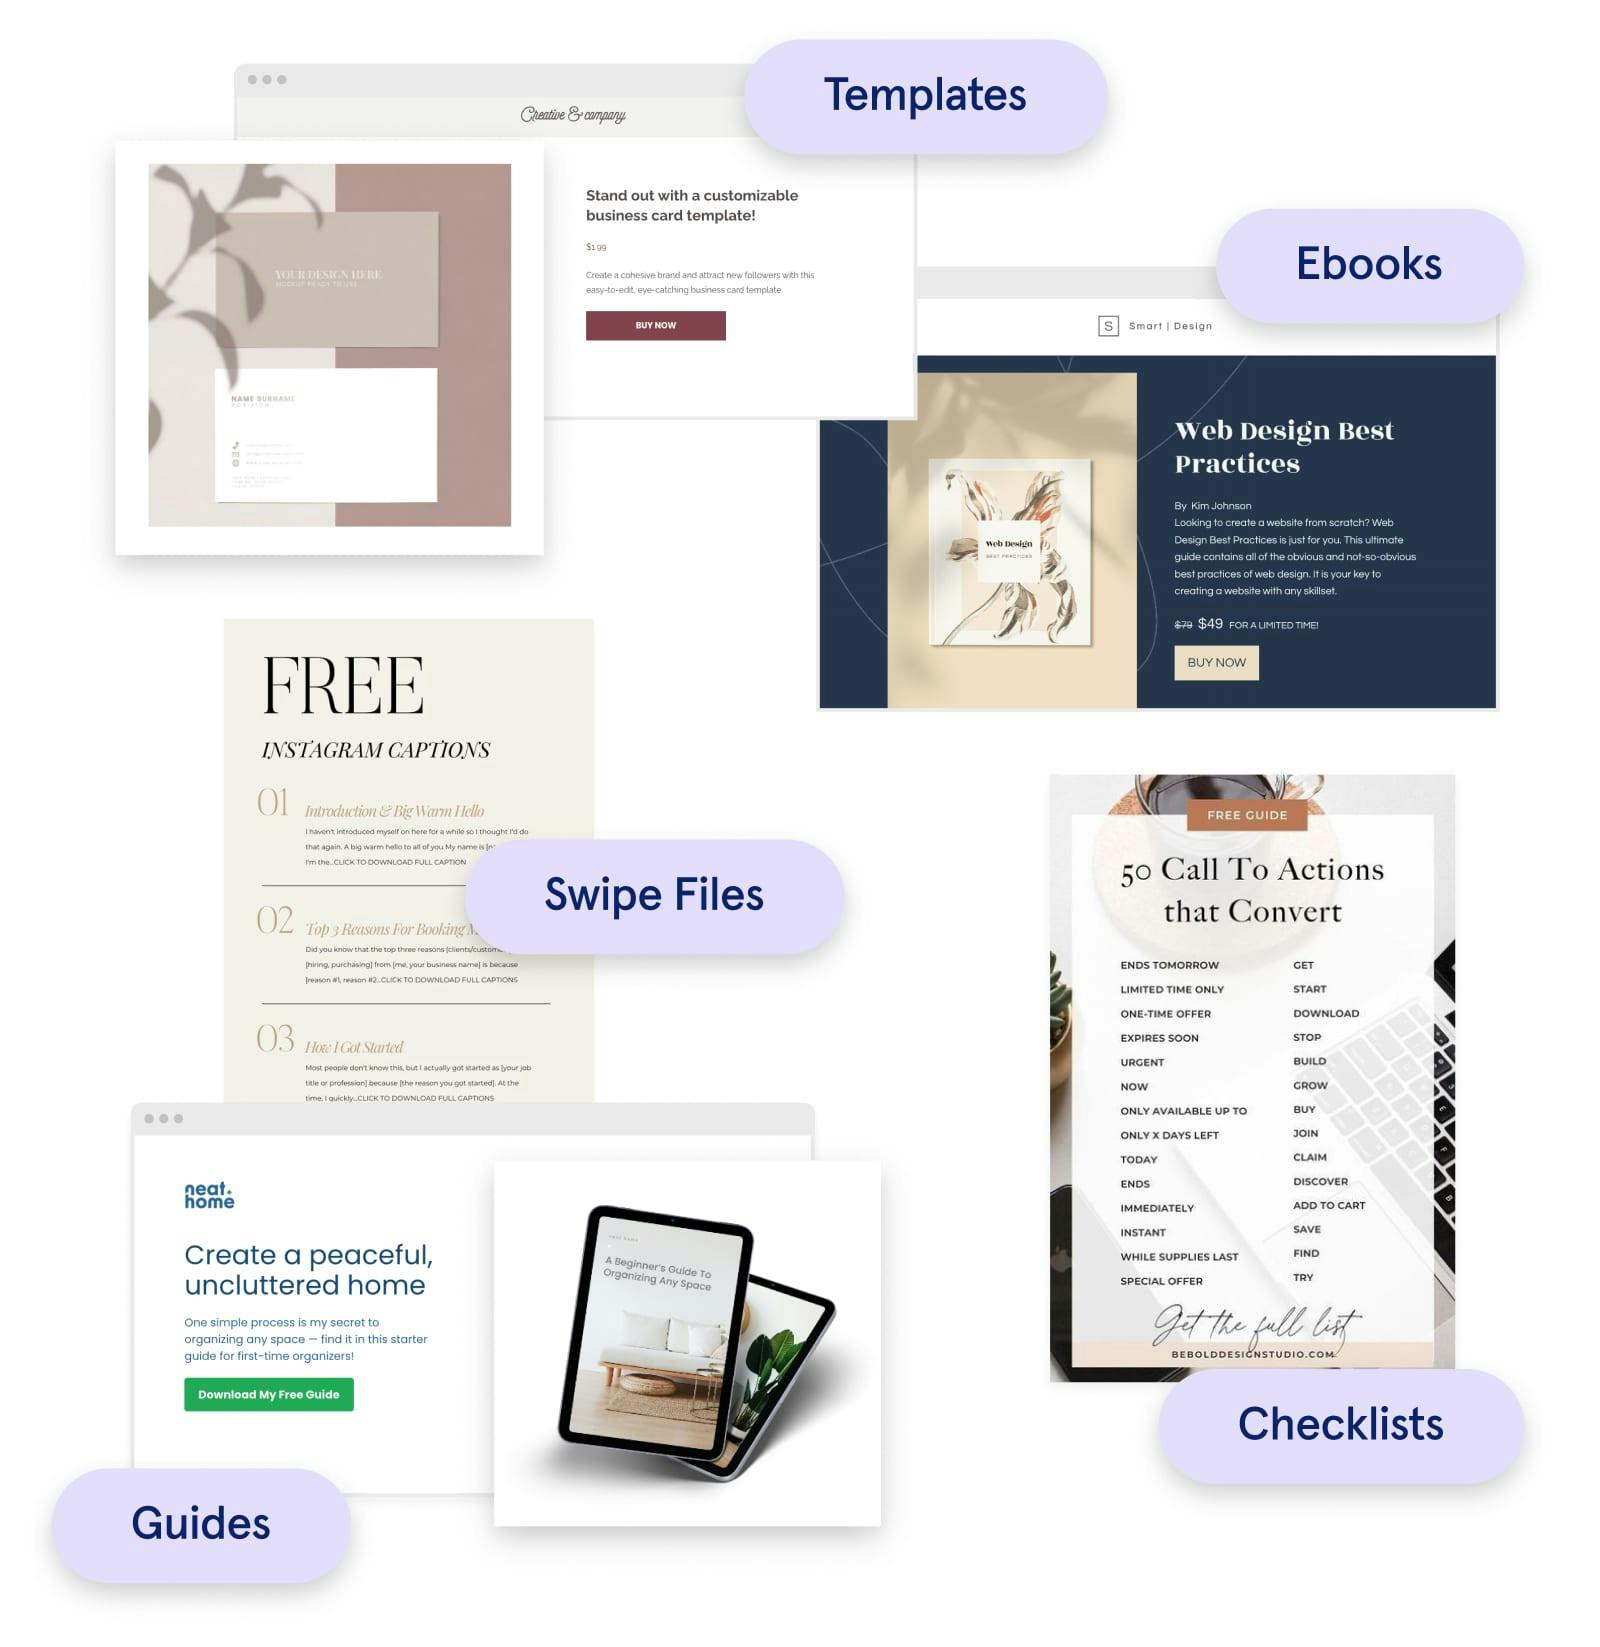 lead magnet examples: templates, ebooks, swipe files, guides and checklists